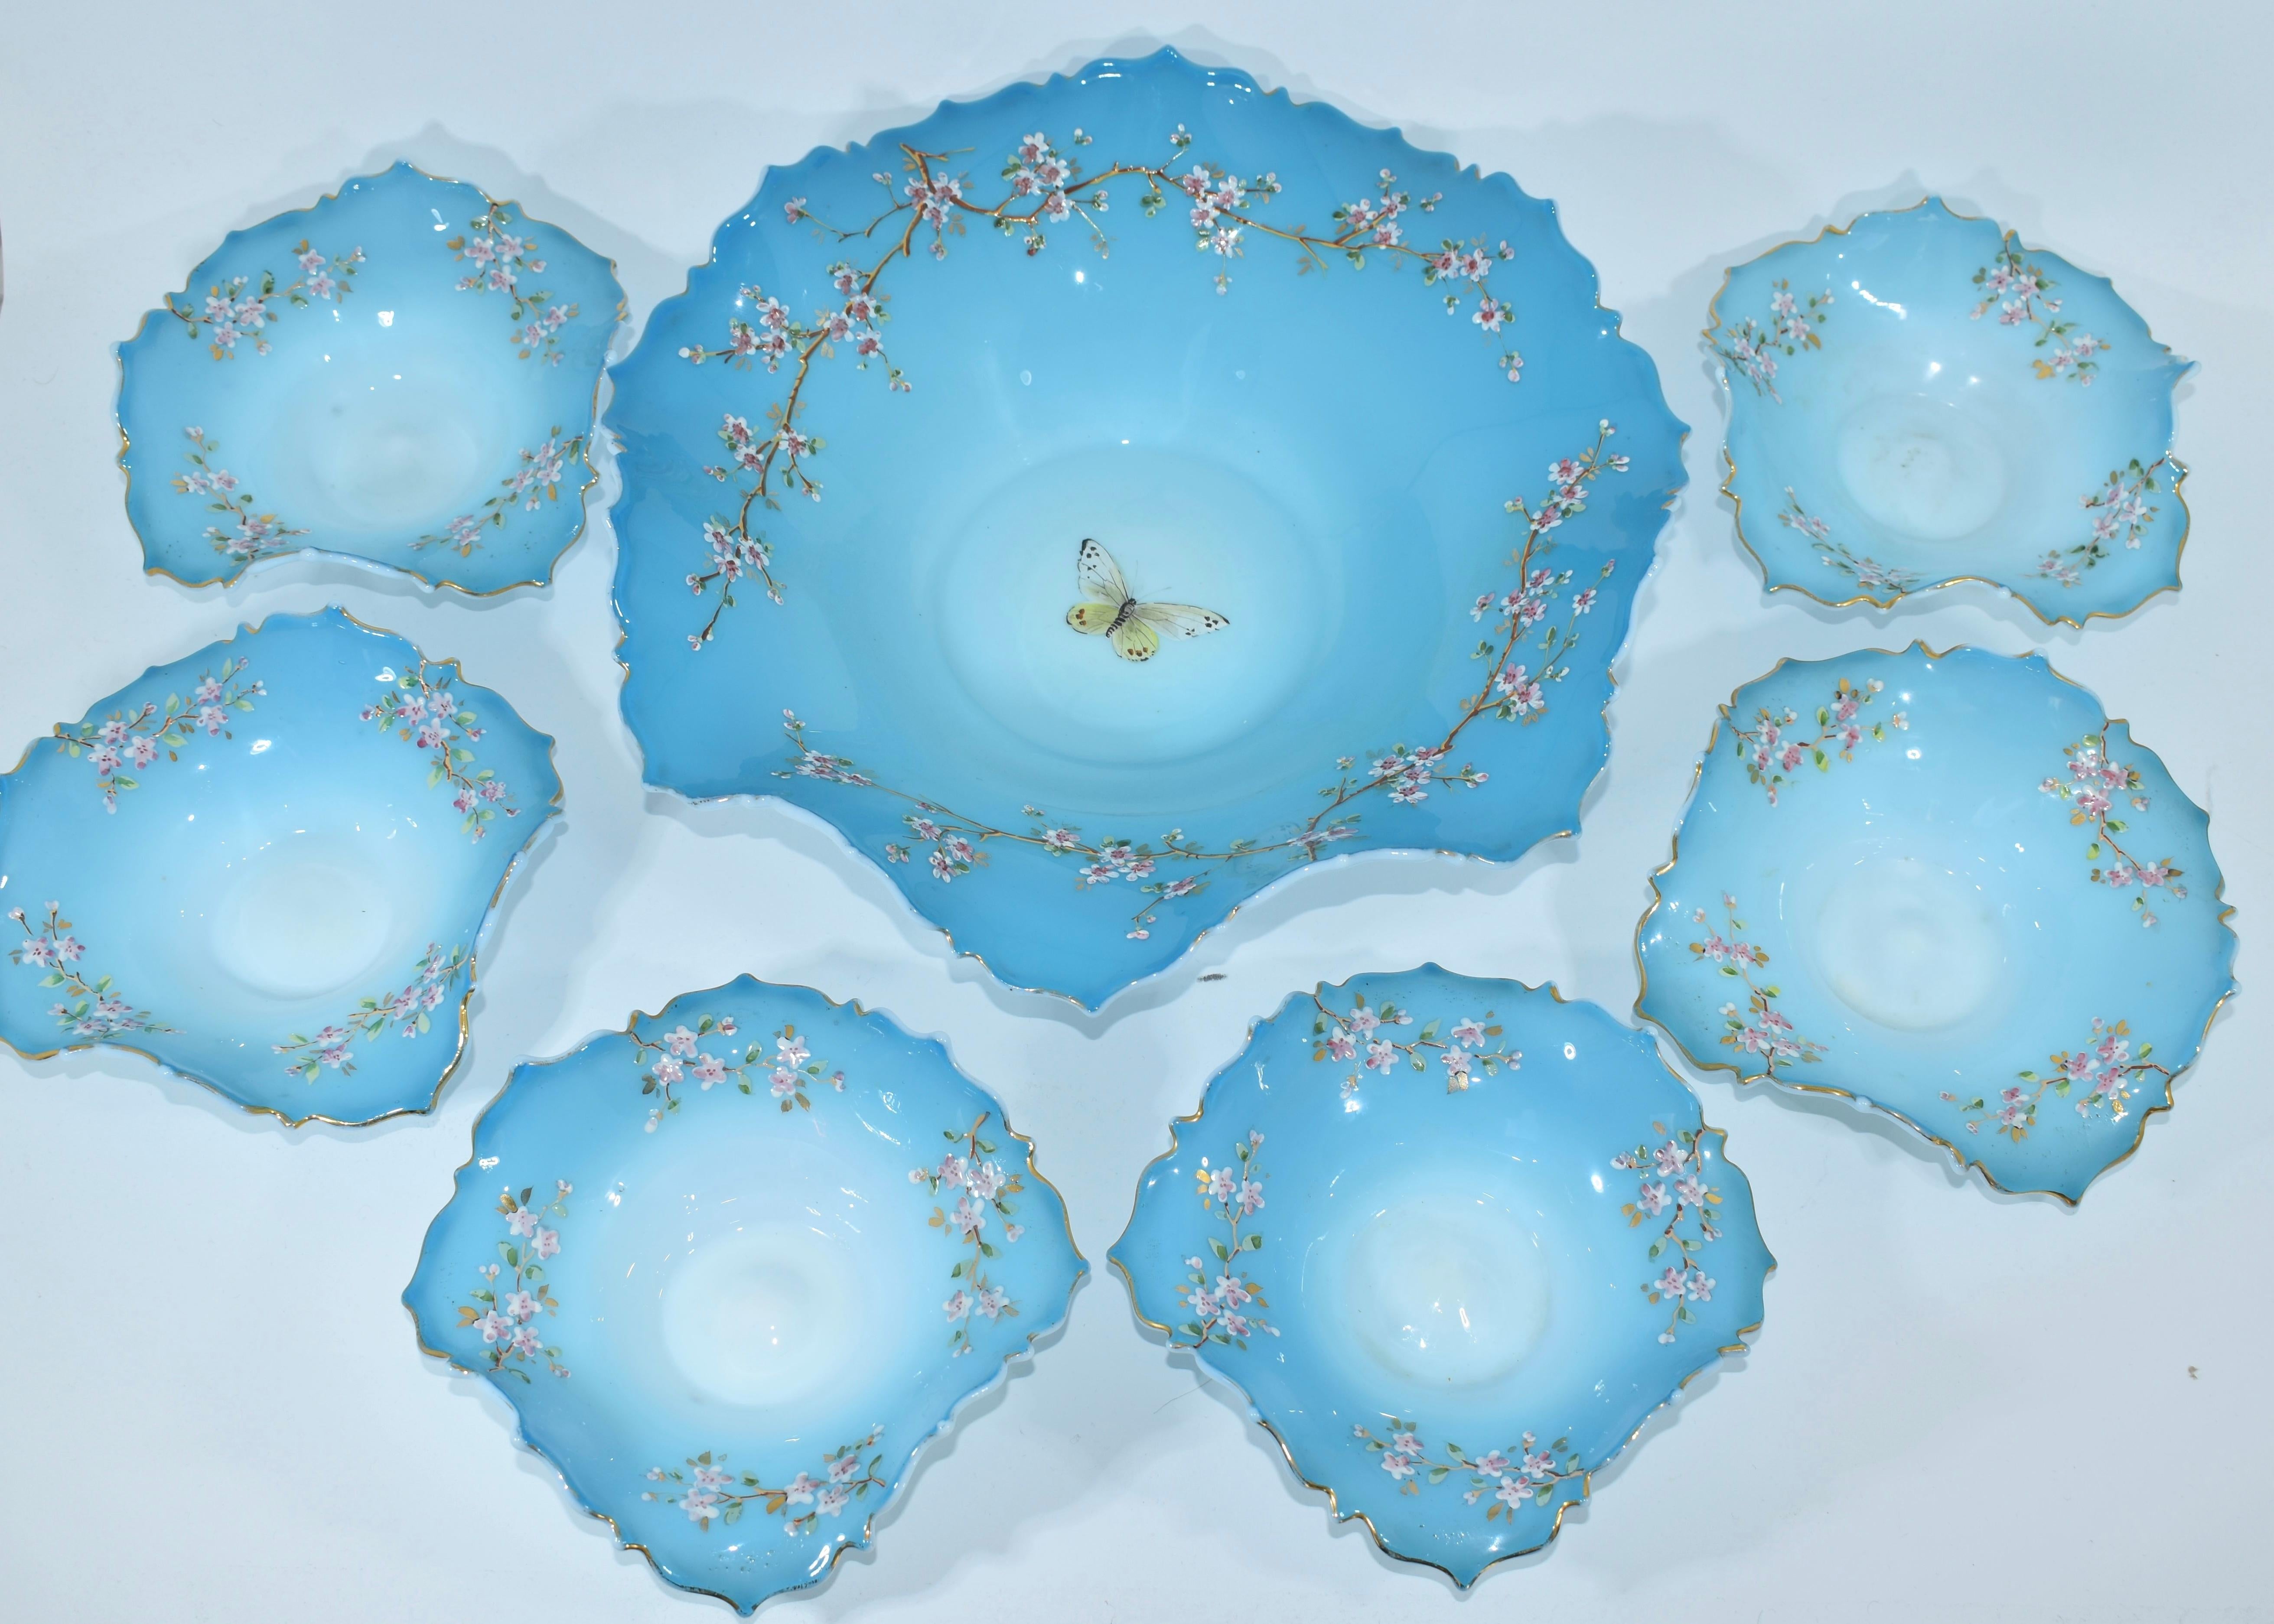 An elegant plate set, a large plate and 6 smaller matching plates

made of two-tone opaline glass, milky white and turquoise, with beautiful wavy edges and colorful enamel decoration

fine example of high quality French opaline glass manufacture